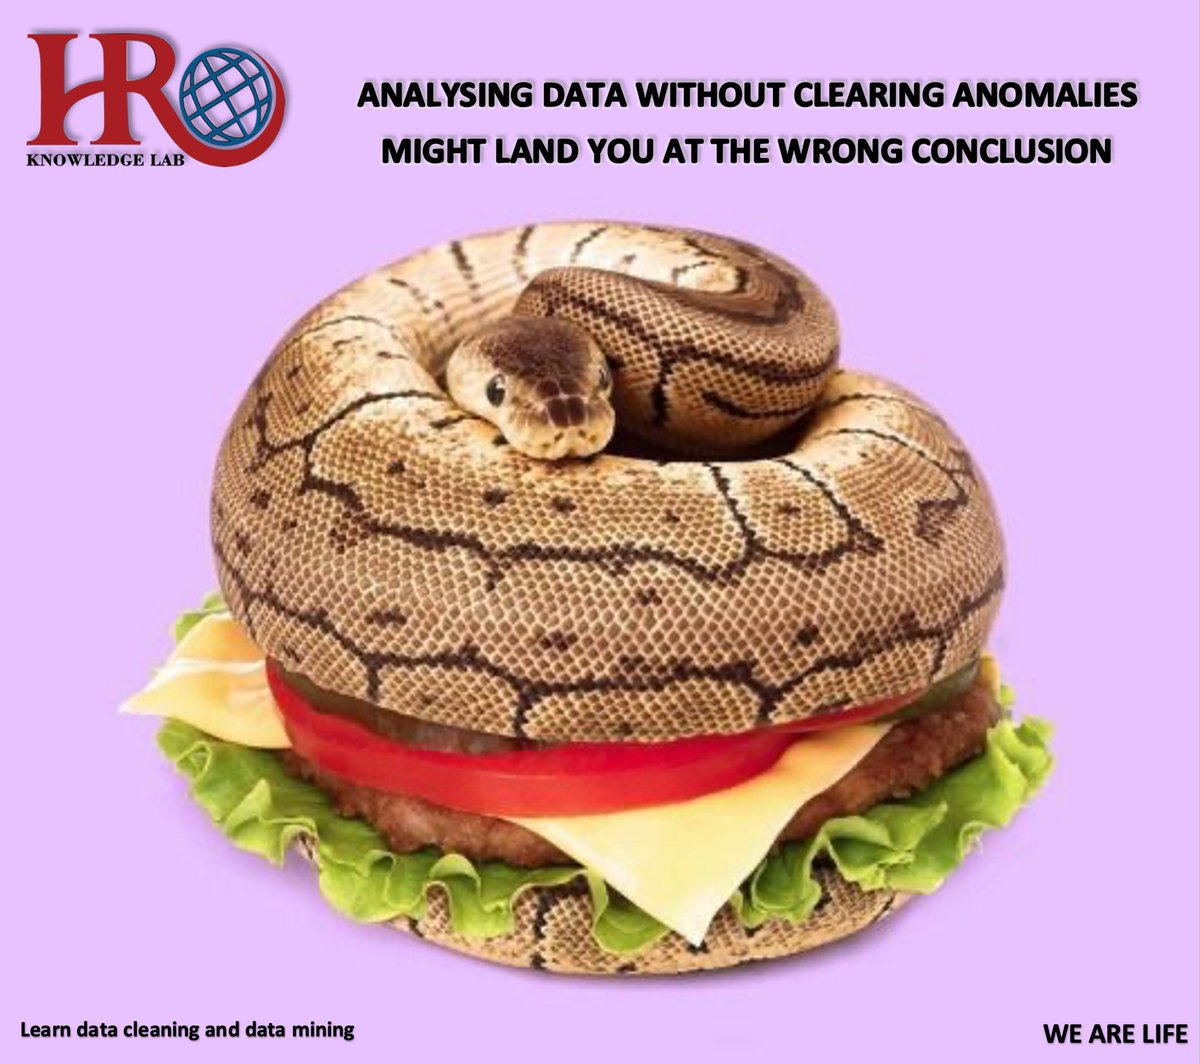 Data cleaning is an important part of data handling or it can eat up your research construct.
#hrknowledgelab #illustriouscircle #hrklsolutions #hrklresearch #HR #datacleaning #datacleansing #datacleanup #DataAnalytics  #dataanalysis #dataanalyst #DataScience #datascientist